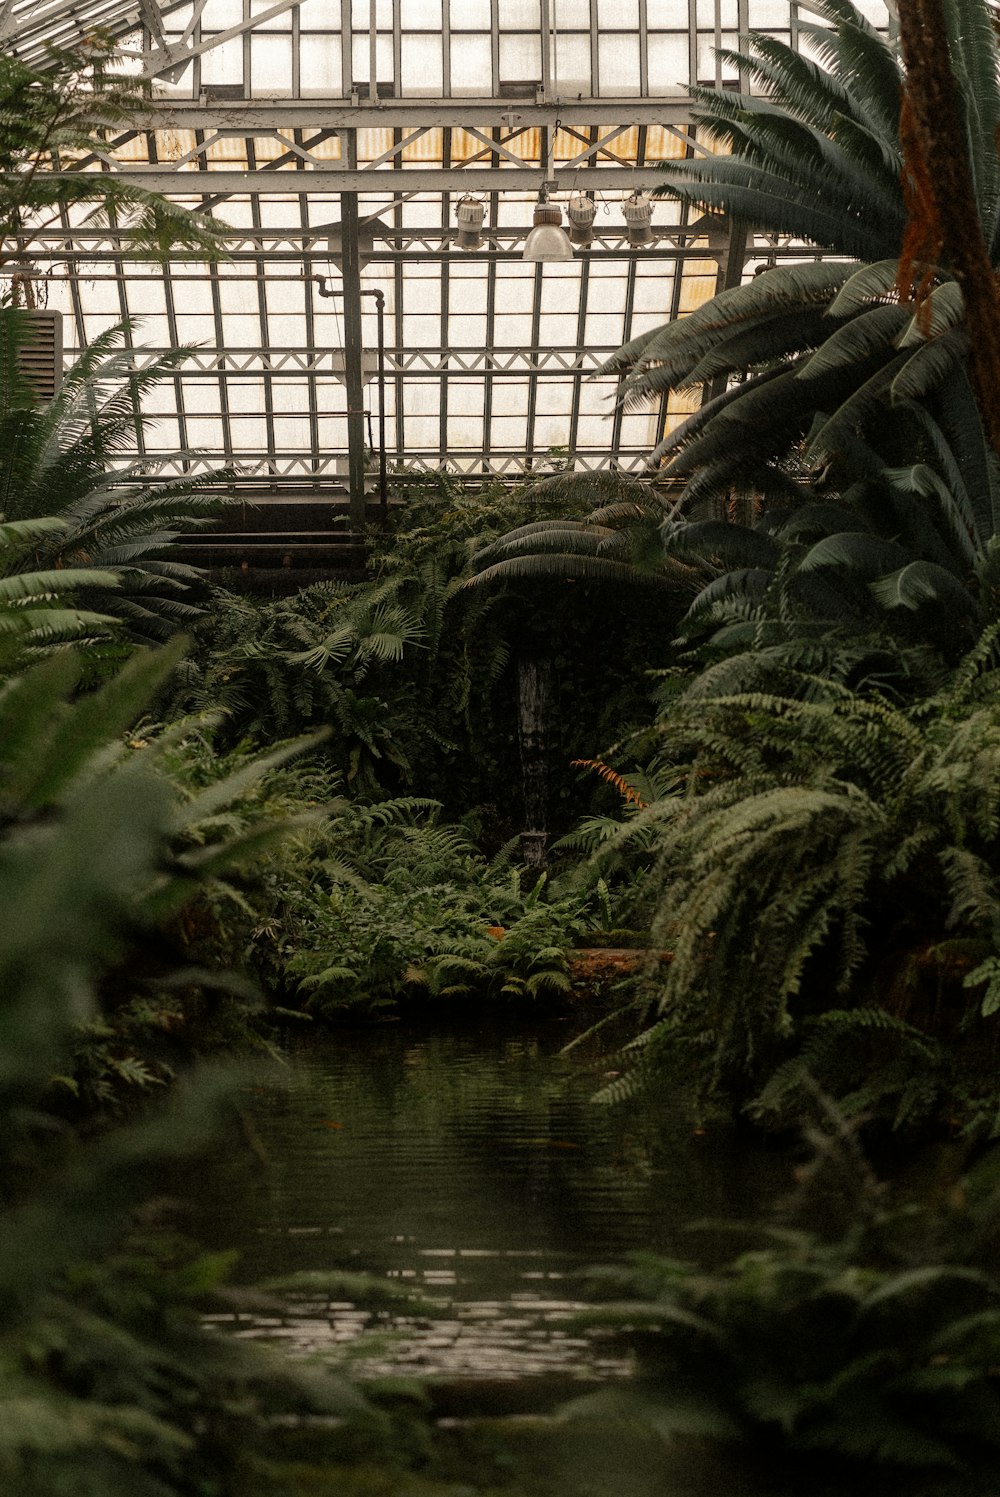 a pond surrounded by trees and plants in a greenhouse